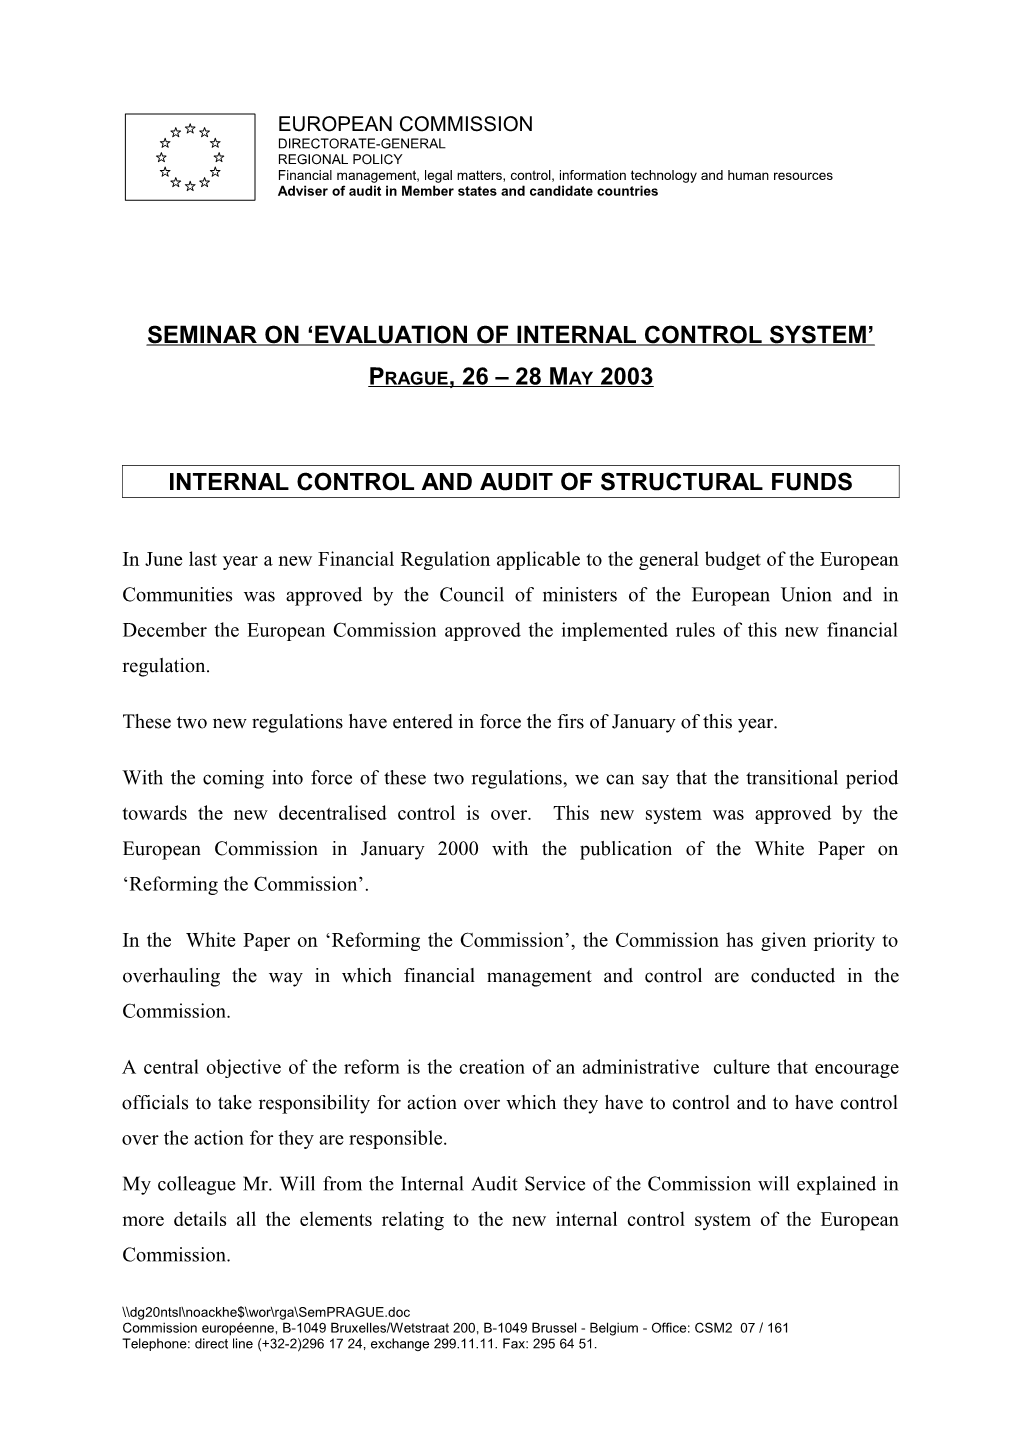 Internal Control and Audit of Structural Funds